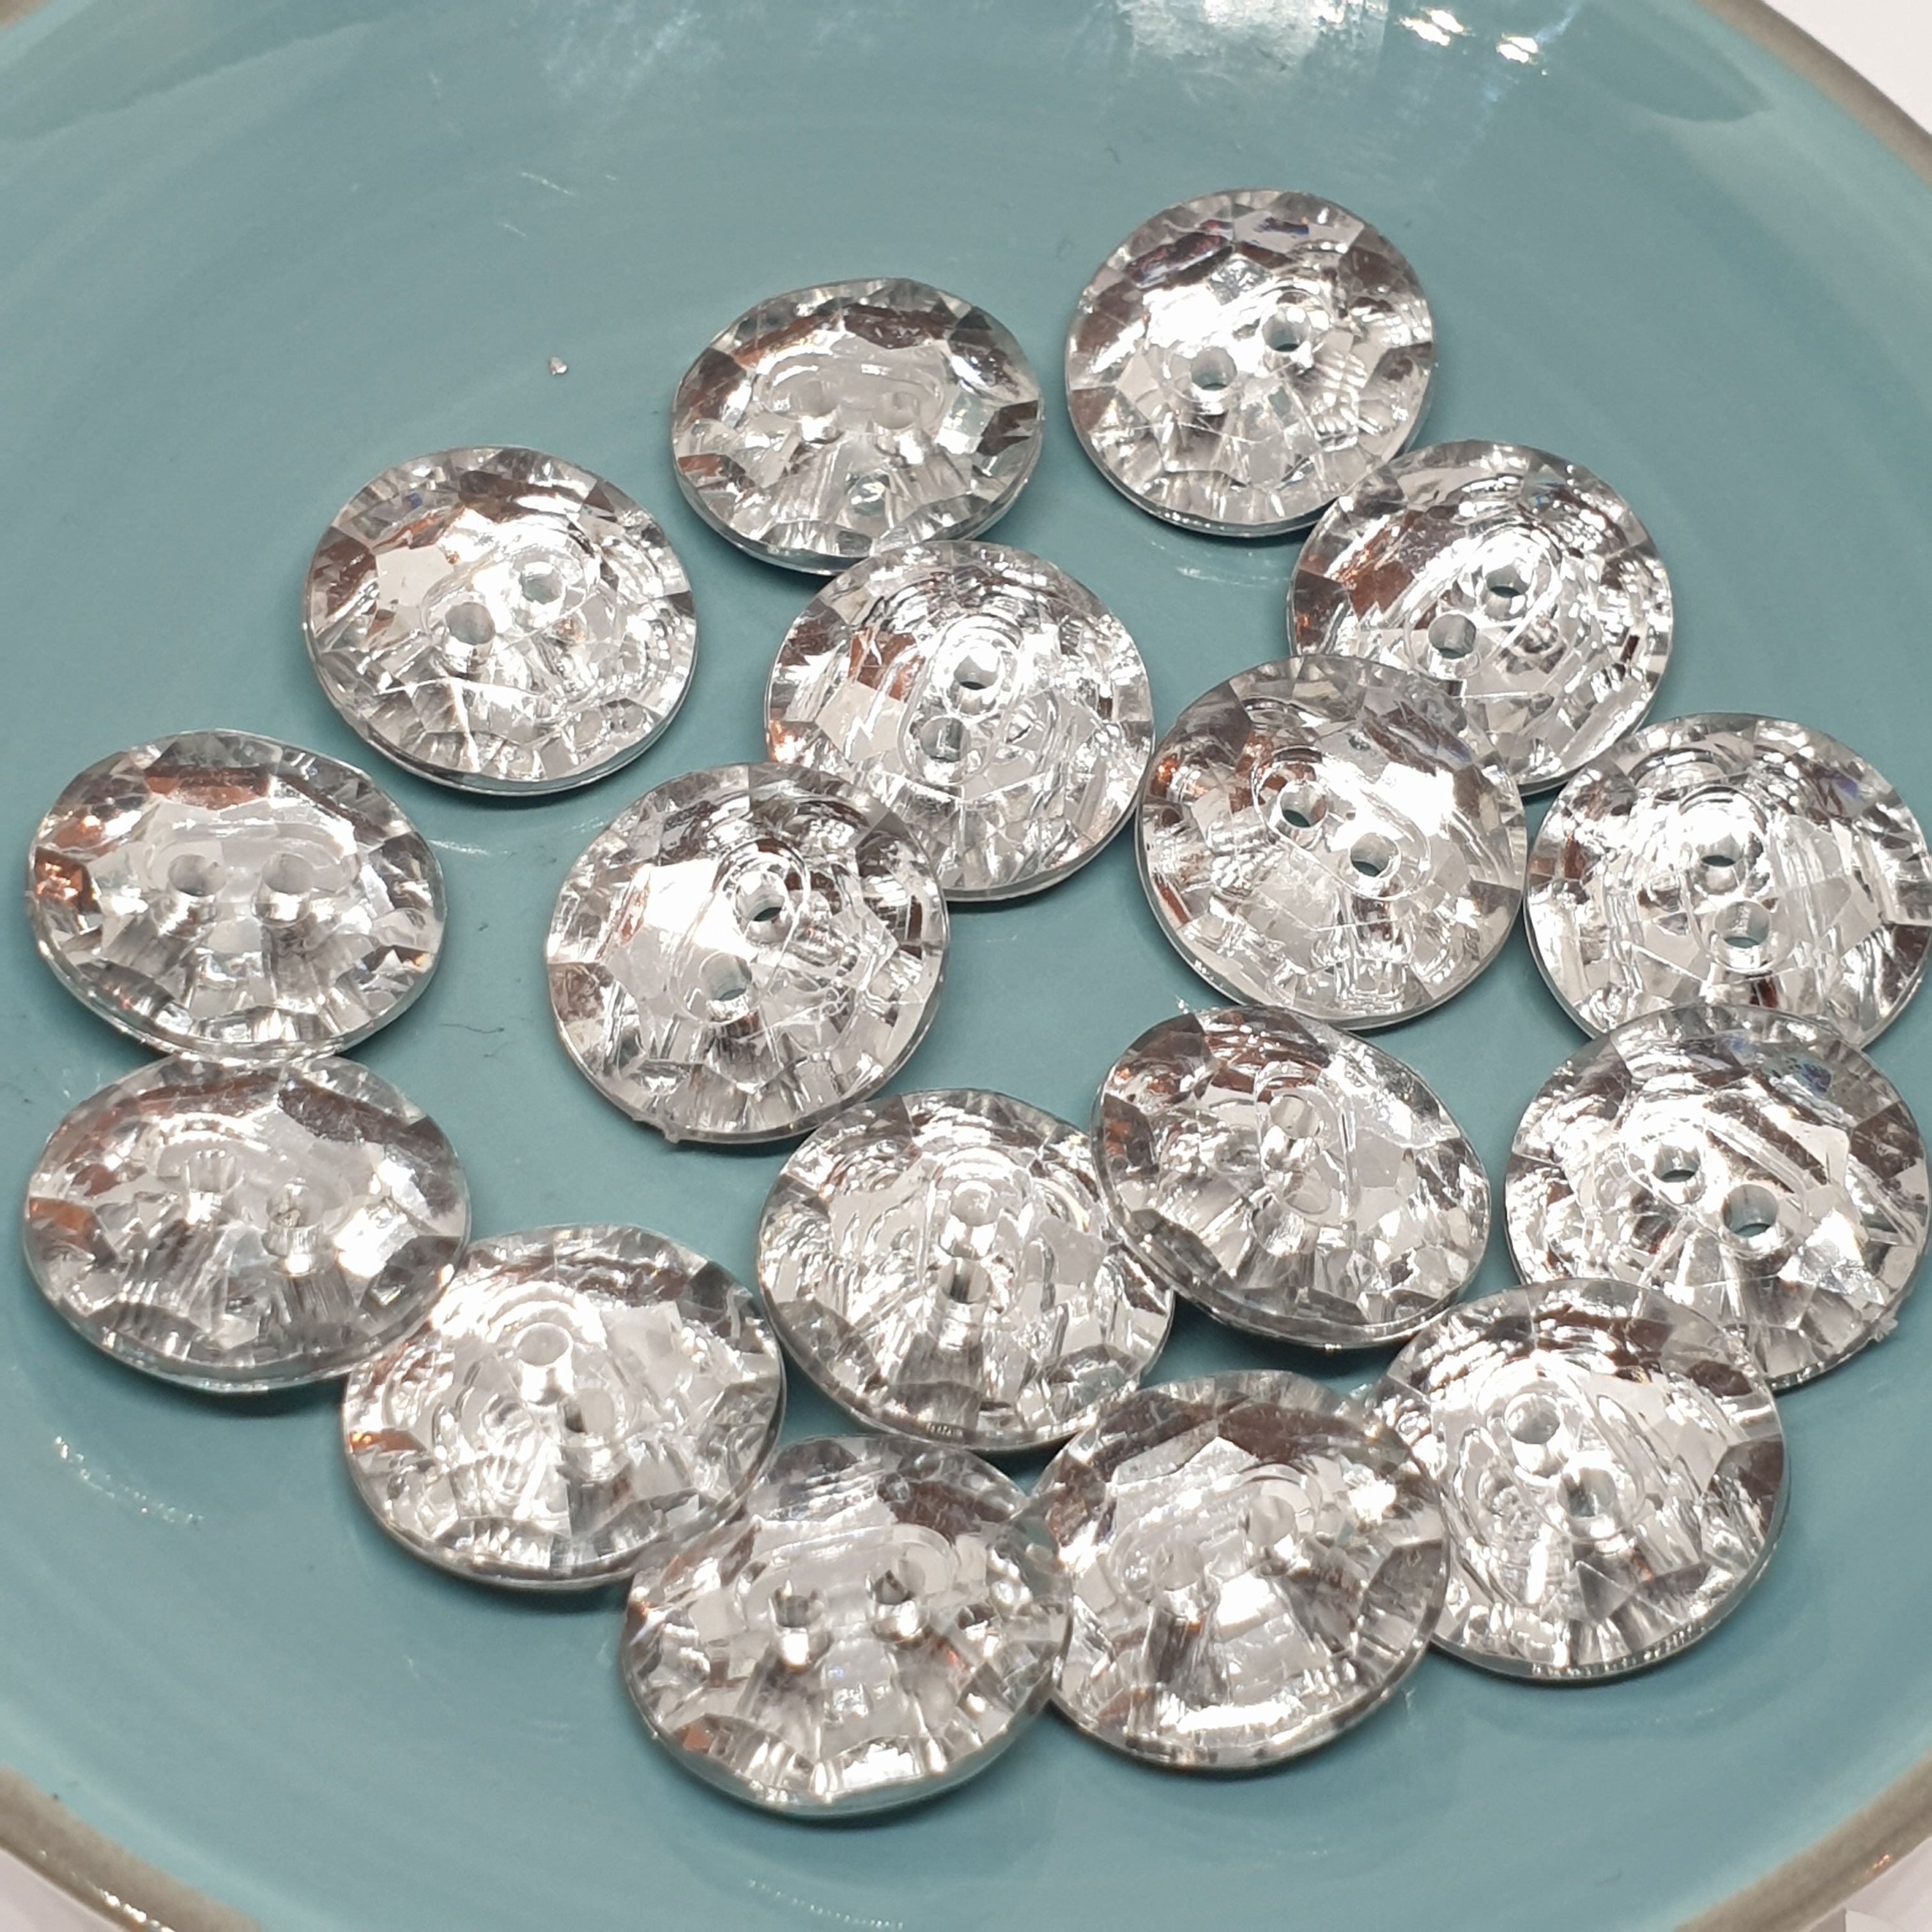 MajorCrafts 40pcs 15mm Crystal Clear Faceted 2 Holes Round Acrylic Sewing Buttons